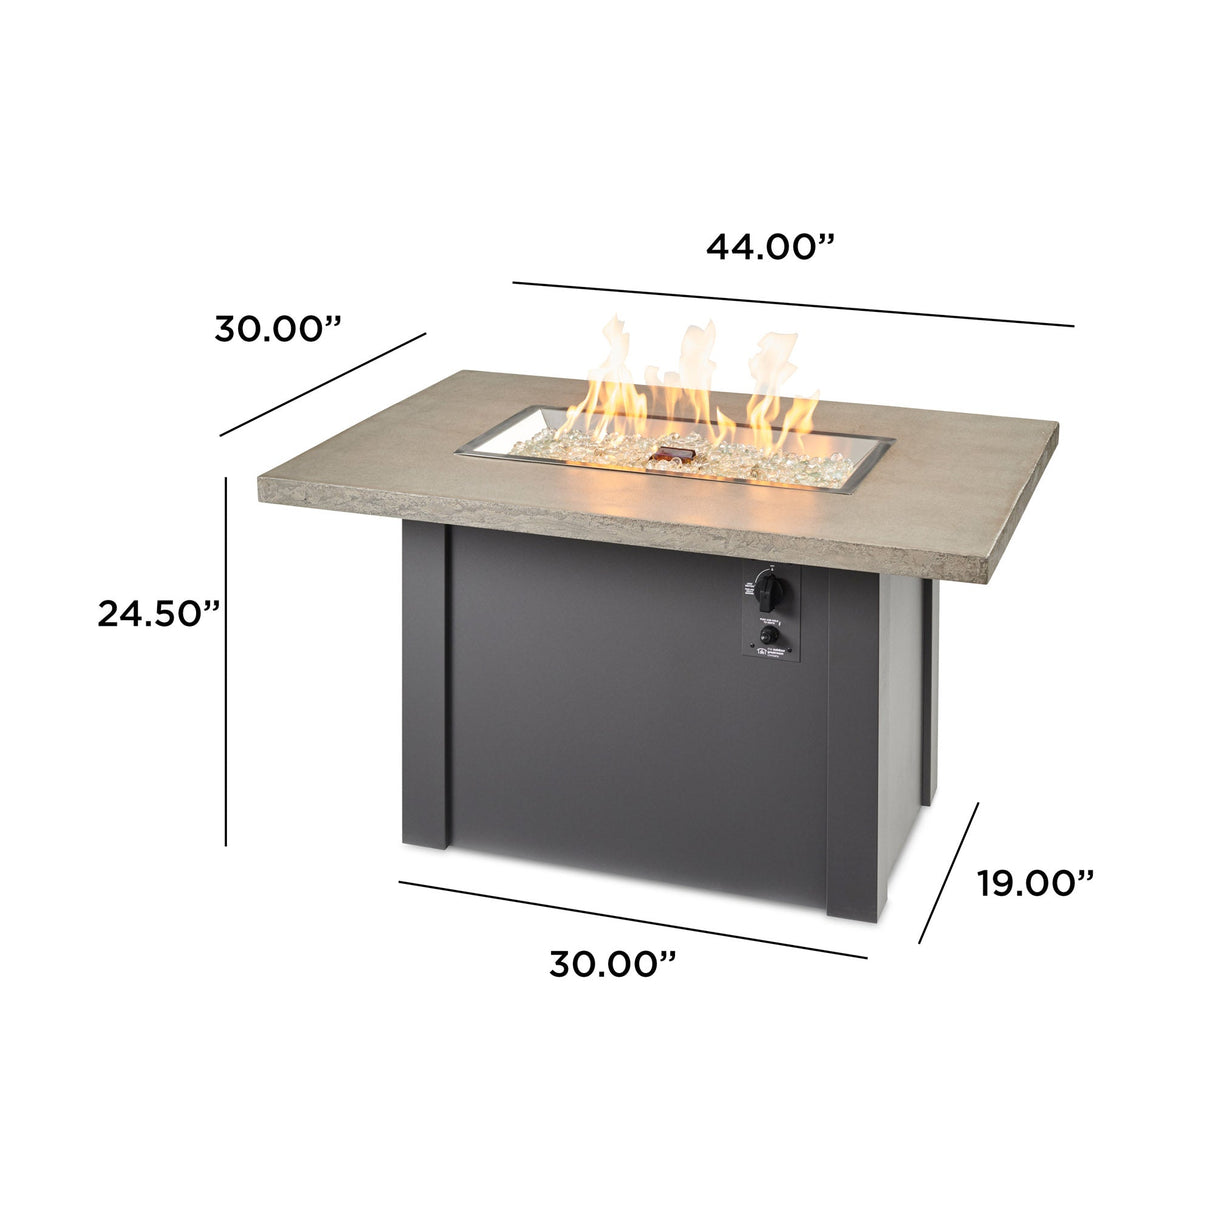 Dimensions overlaid on the Havenwood Rectangular Gas Fire Table with a Pebble Grey top and Graphite Grey base